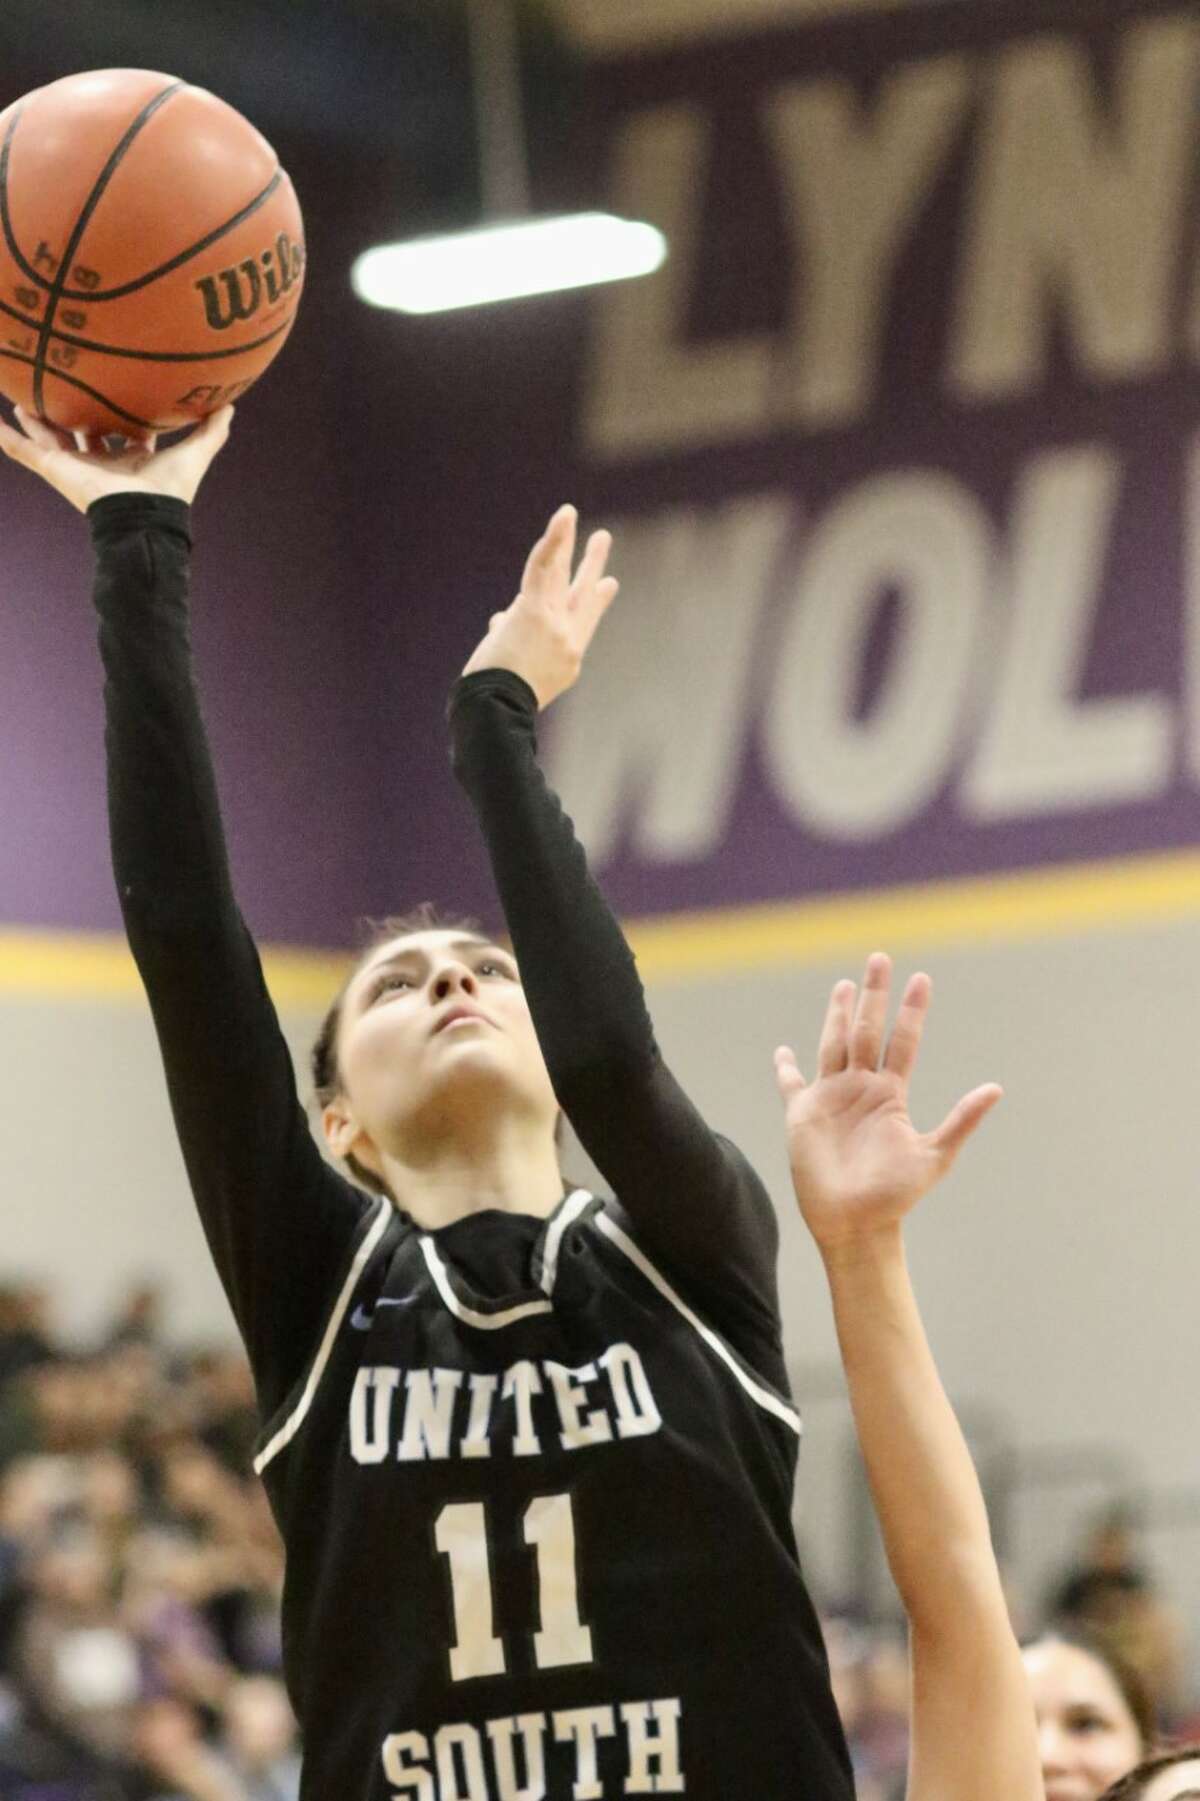 Bridgette Tello scored a team-high 18 points in United South's 68-42 win over LBJ on Tuesday, Feb. 7.